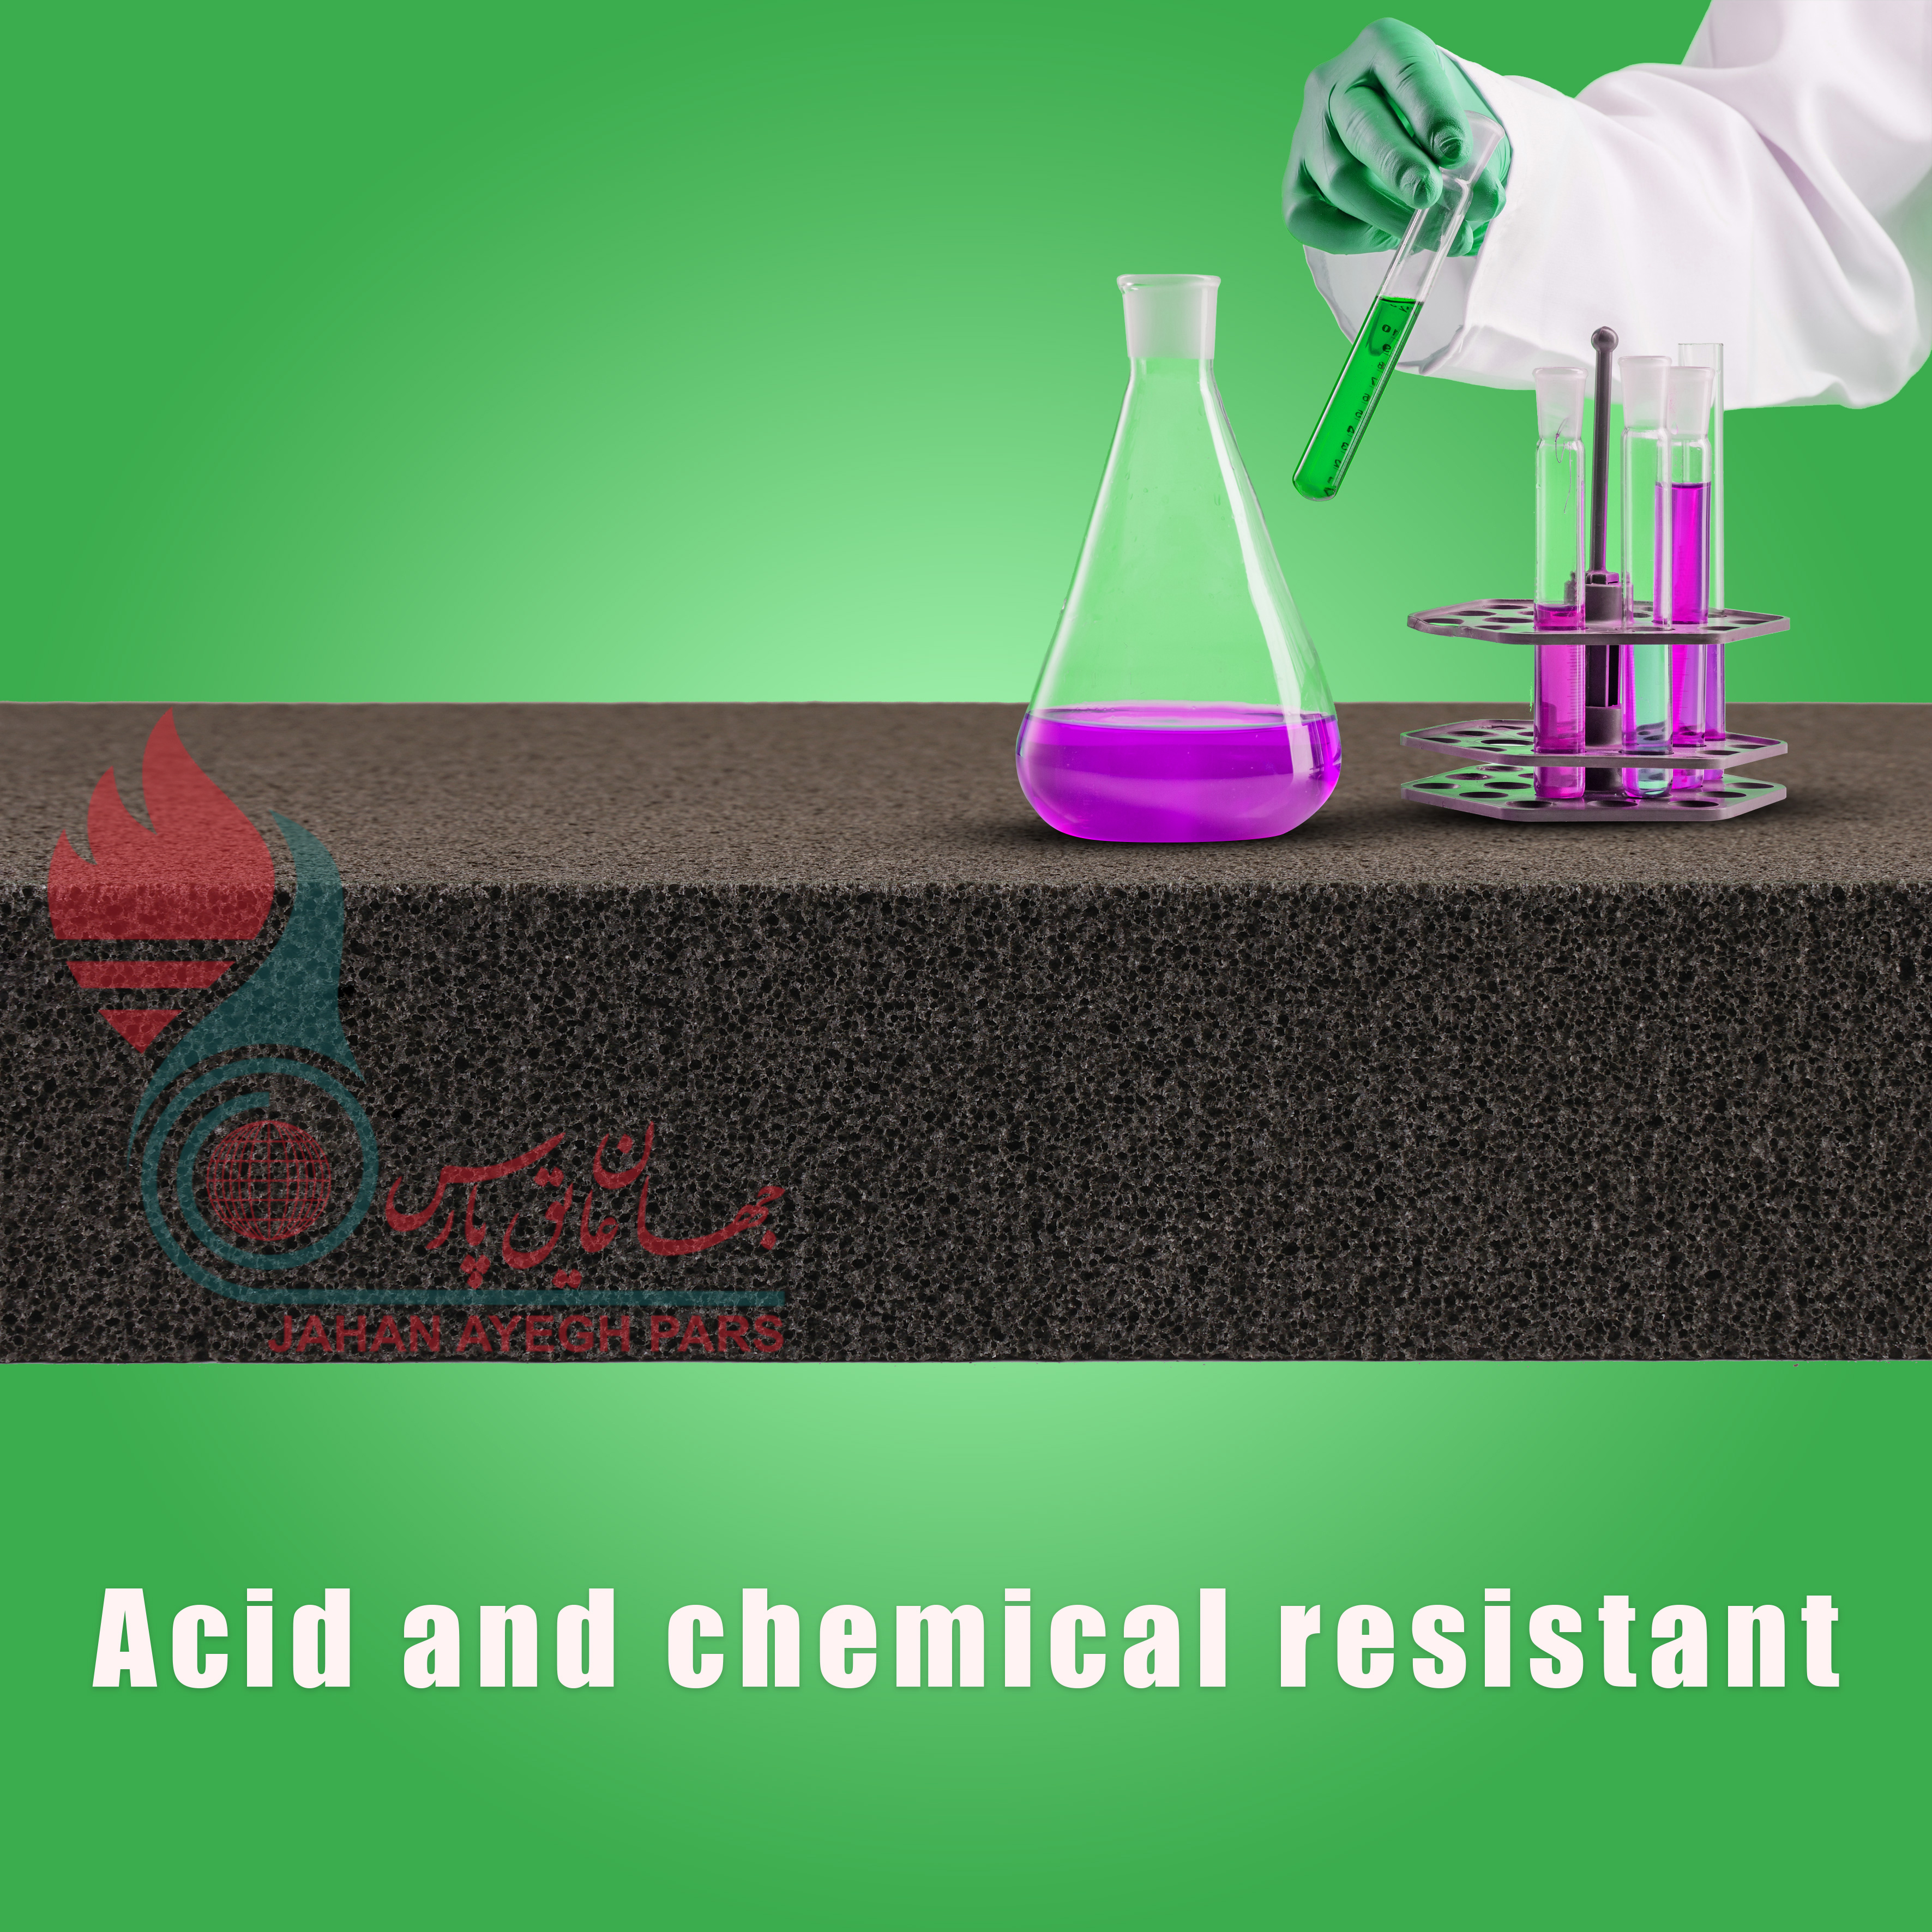 Acid and chemical resistant